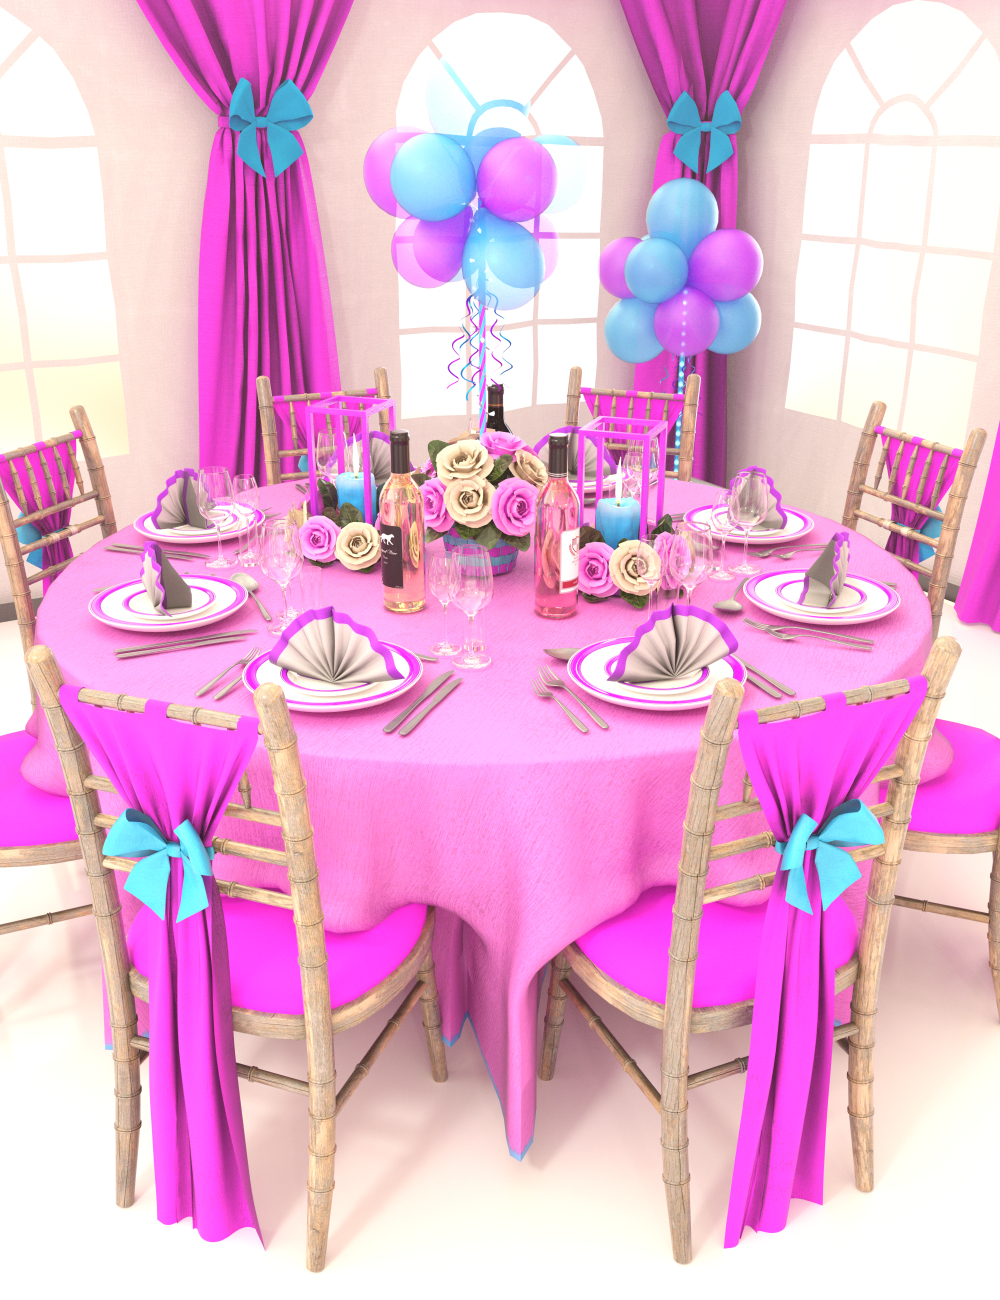 Dinner Party Themes by: Merlin Studios, 3D Models by Daz 3D